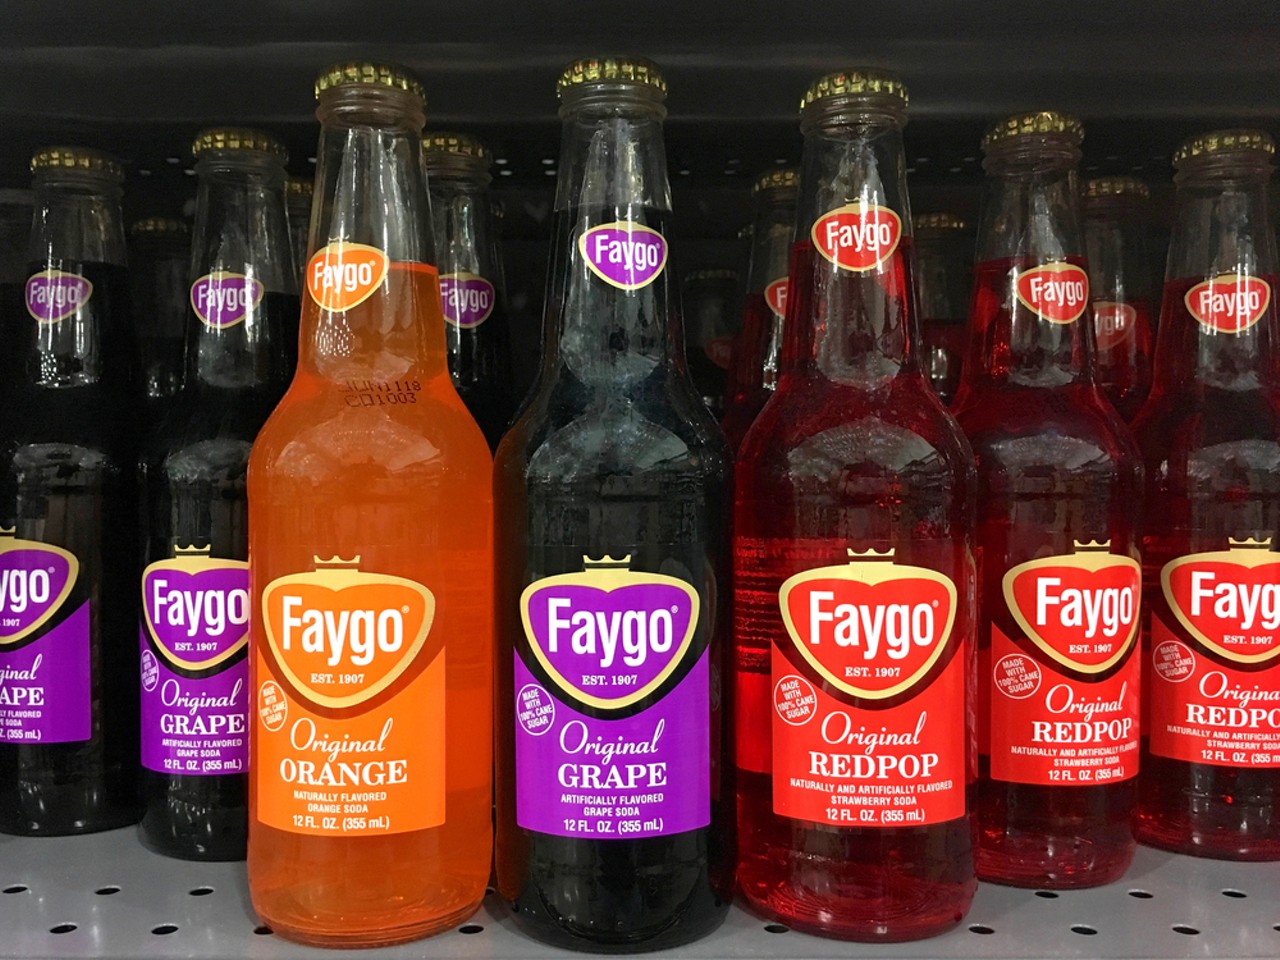 Oldest pop: Faygo (1907)
While the beloved ginger ale Vernors was developed by a pharmacist in Detroit in 1866, it stopped being manufactured here in the 1980s, and Vernors is now part of the Massachusetts-based parent company of Dr Pepper. Faygo, invented by Russian immigrant brothers, is still headquartered in and produced in Detroit, thanks in large part to strong sales generated by rap duo Insane Clown Posse and their Faygo-lovin&#146; fans, the Juggalos.
Photo via Shutterstock